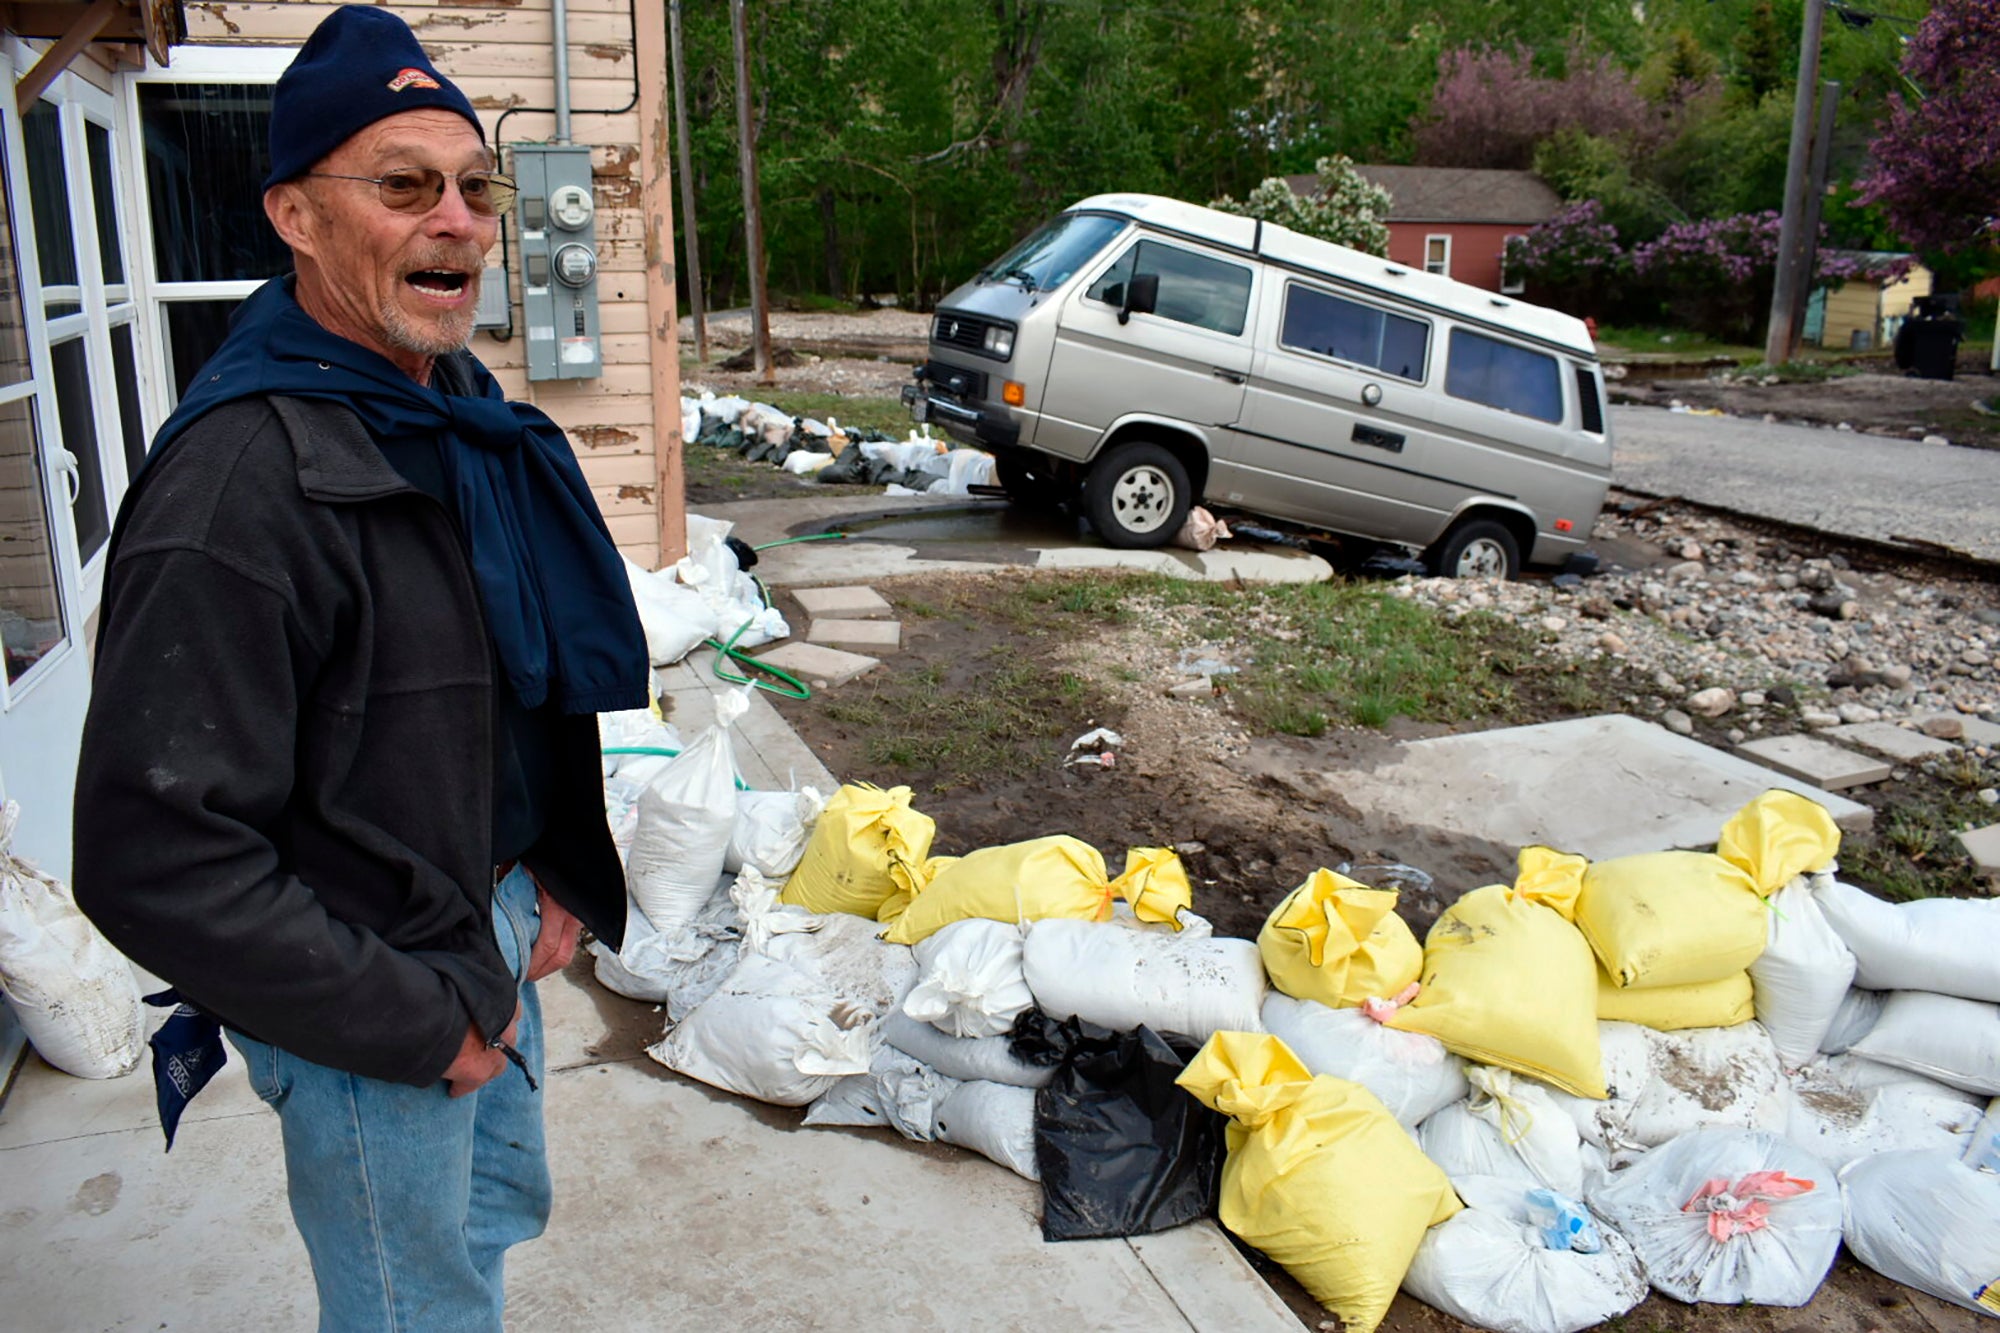 Ken Ebel is seen in front of his flood-damaged house and yard, Tuesday, June 14, 2022, in Red Lodge, Mont. (Photo: Matthew Brown, AP)